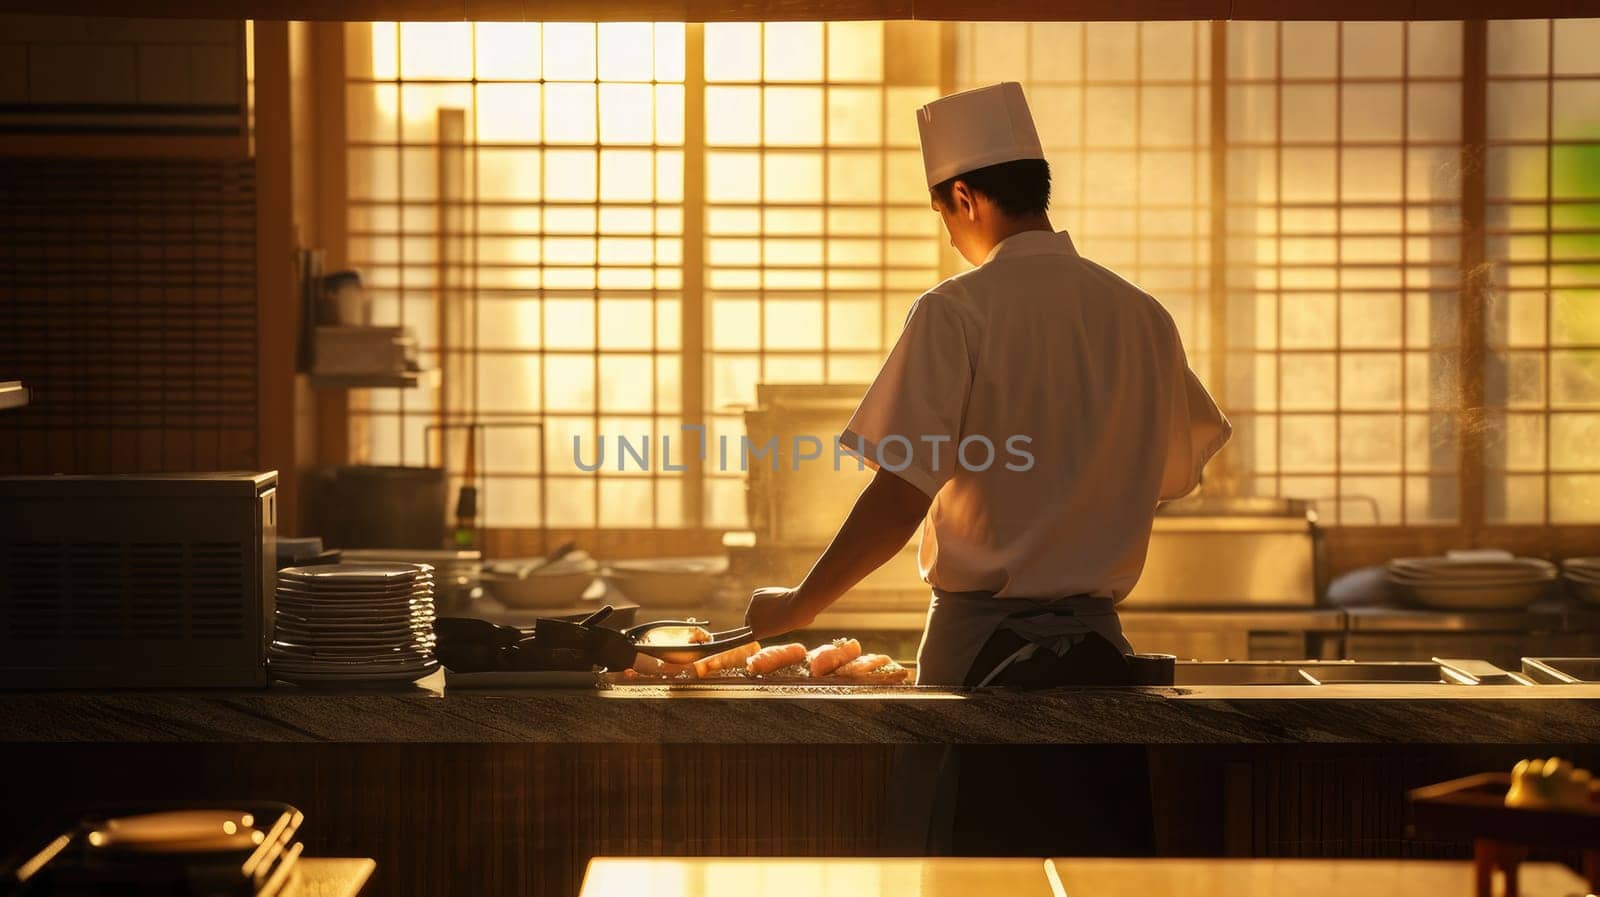 Back view of chef at work in kitchen. This shot captures the atmosphere of creativity and professionalism in the culinary world.